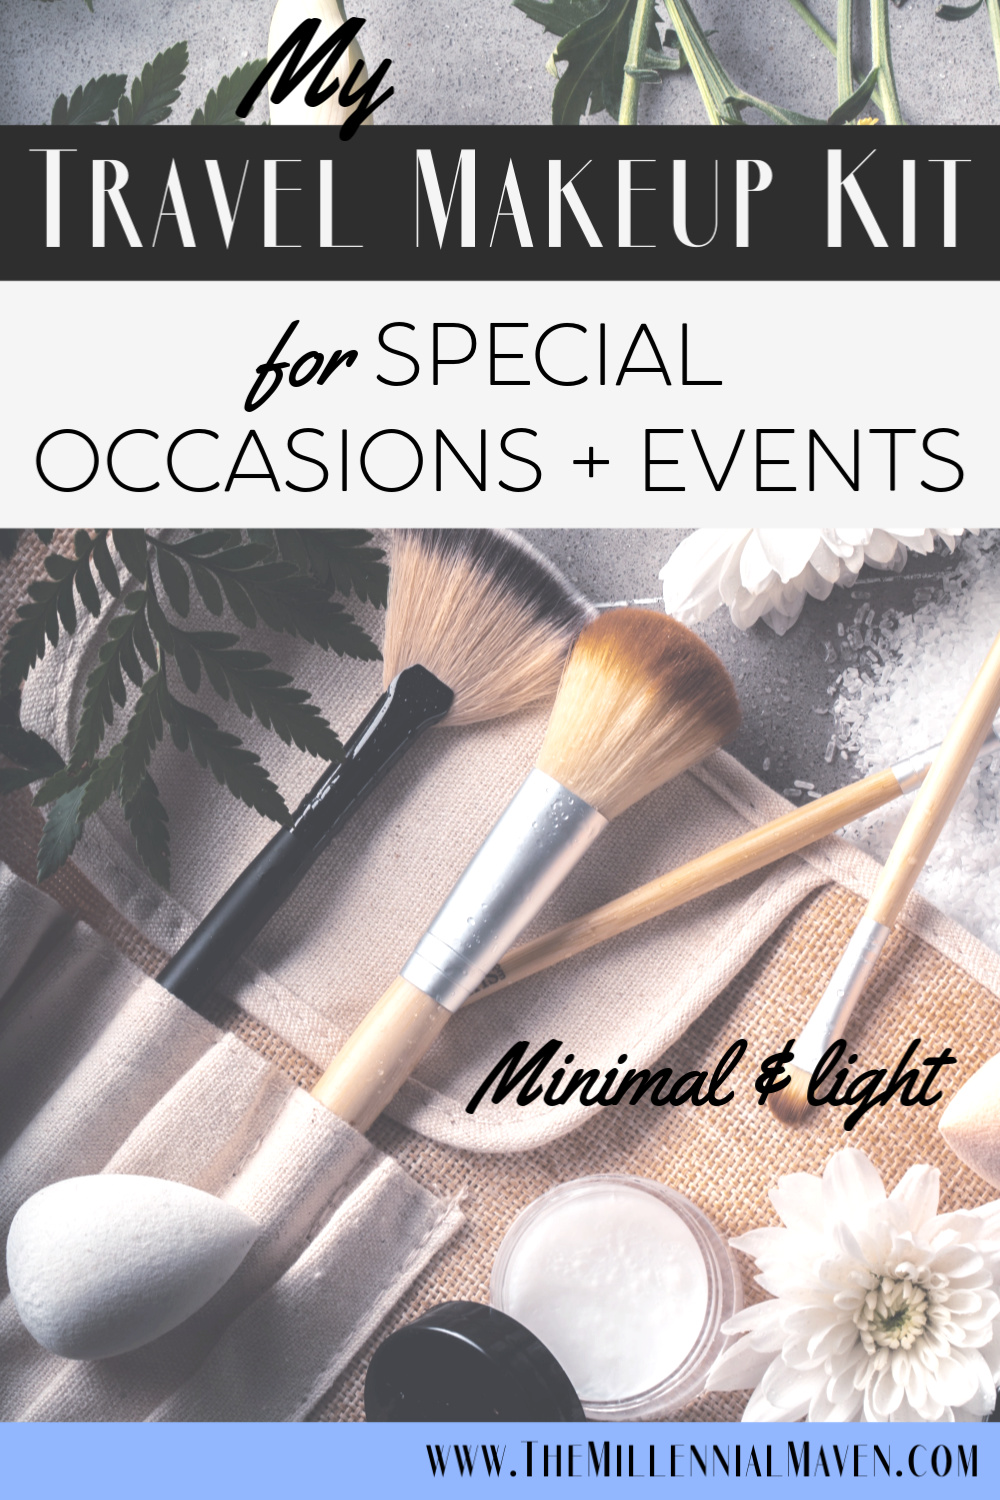 Travel Makeup Kit for Special Events & Memorable Moments || Wedding Makeup || The Millennial Maven #travelmakeup #weddingmakeup #weddingguestmakeup #professionalmakeup #travelbeauty